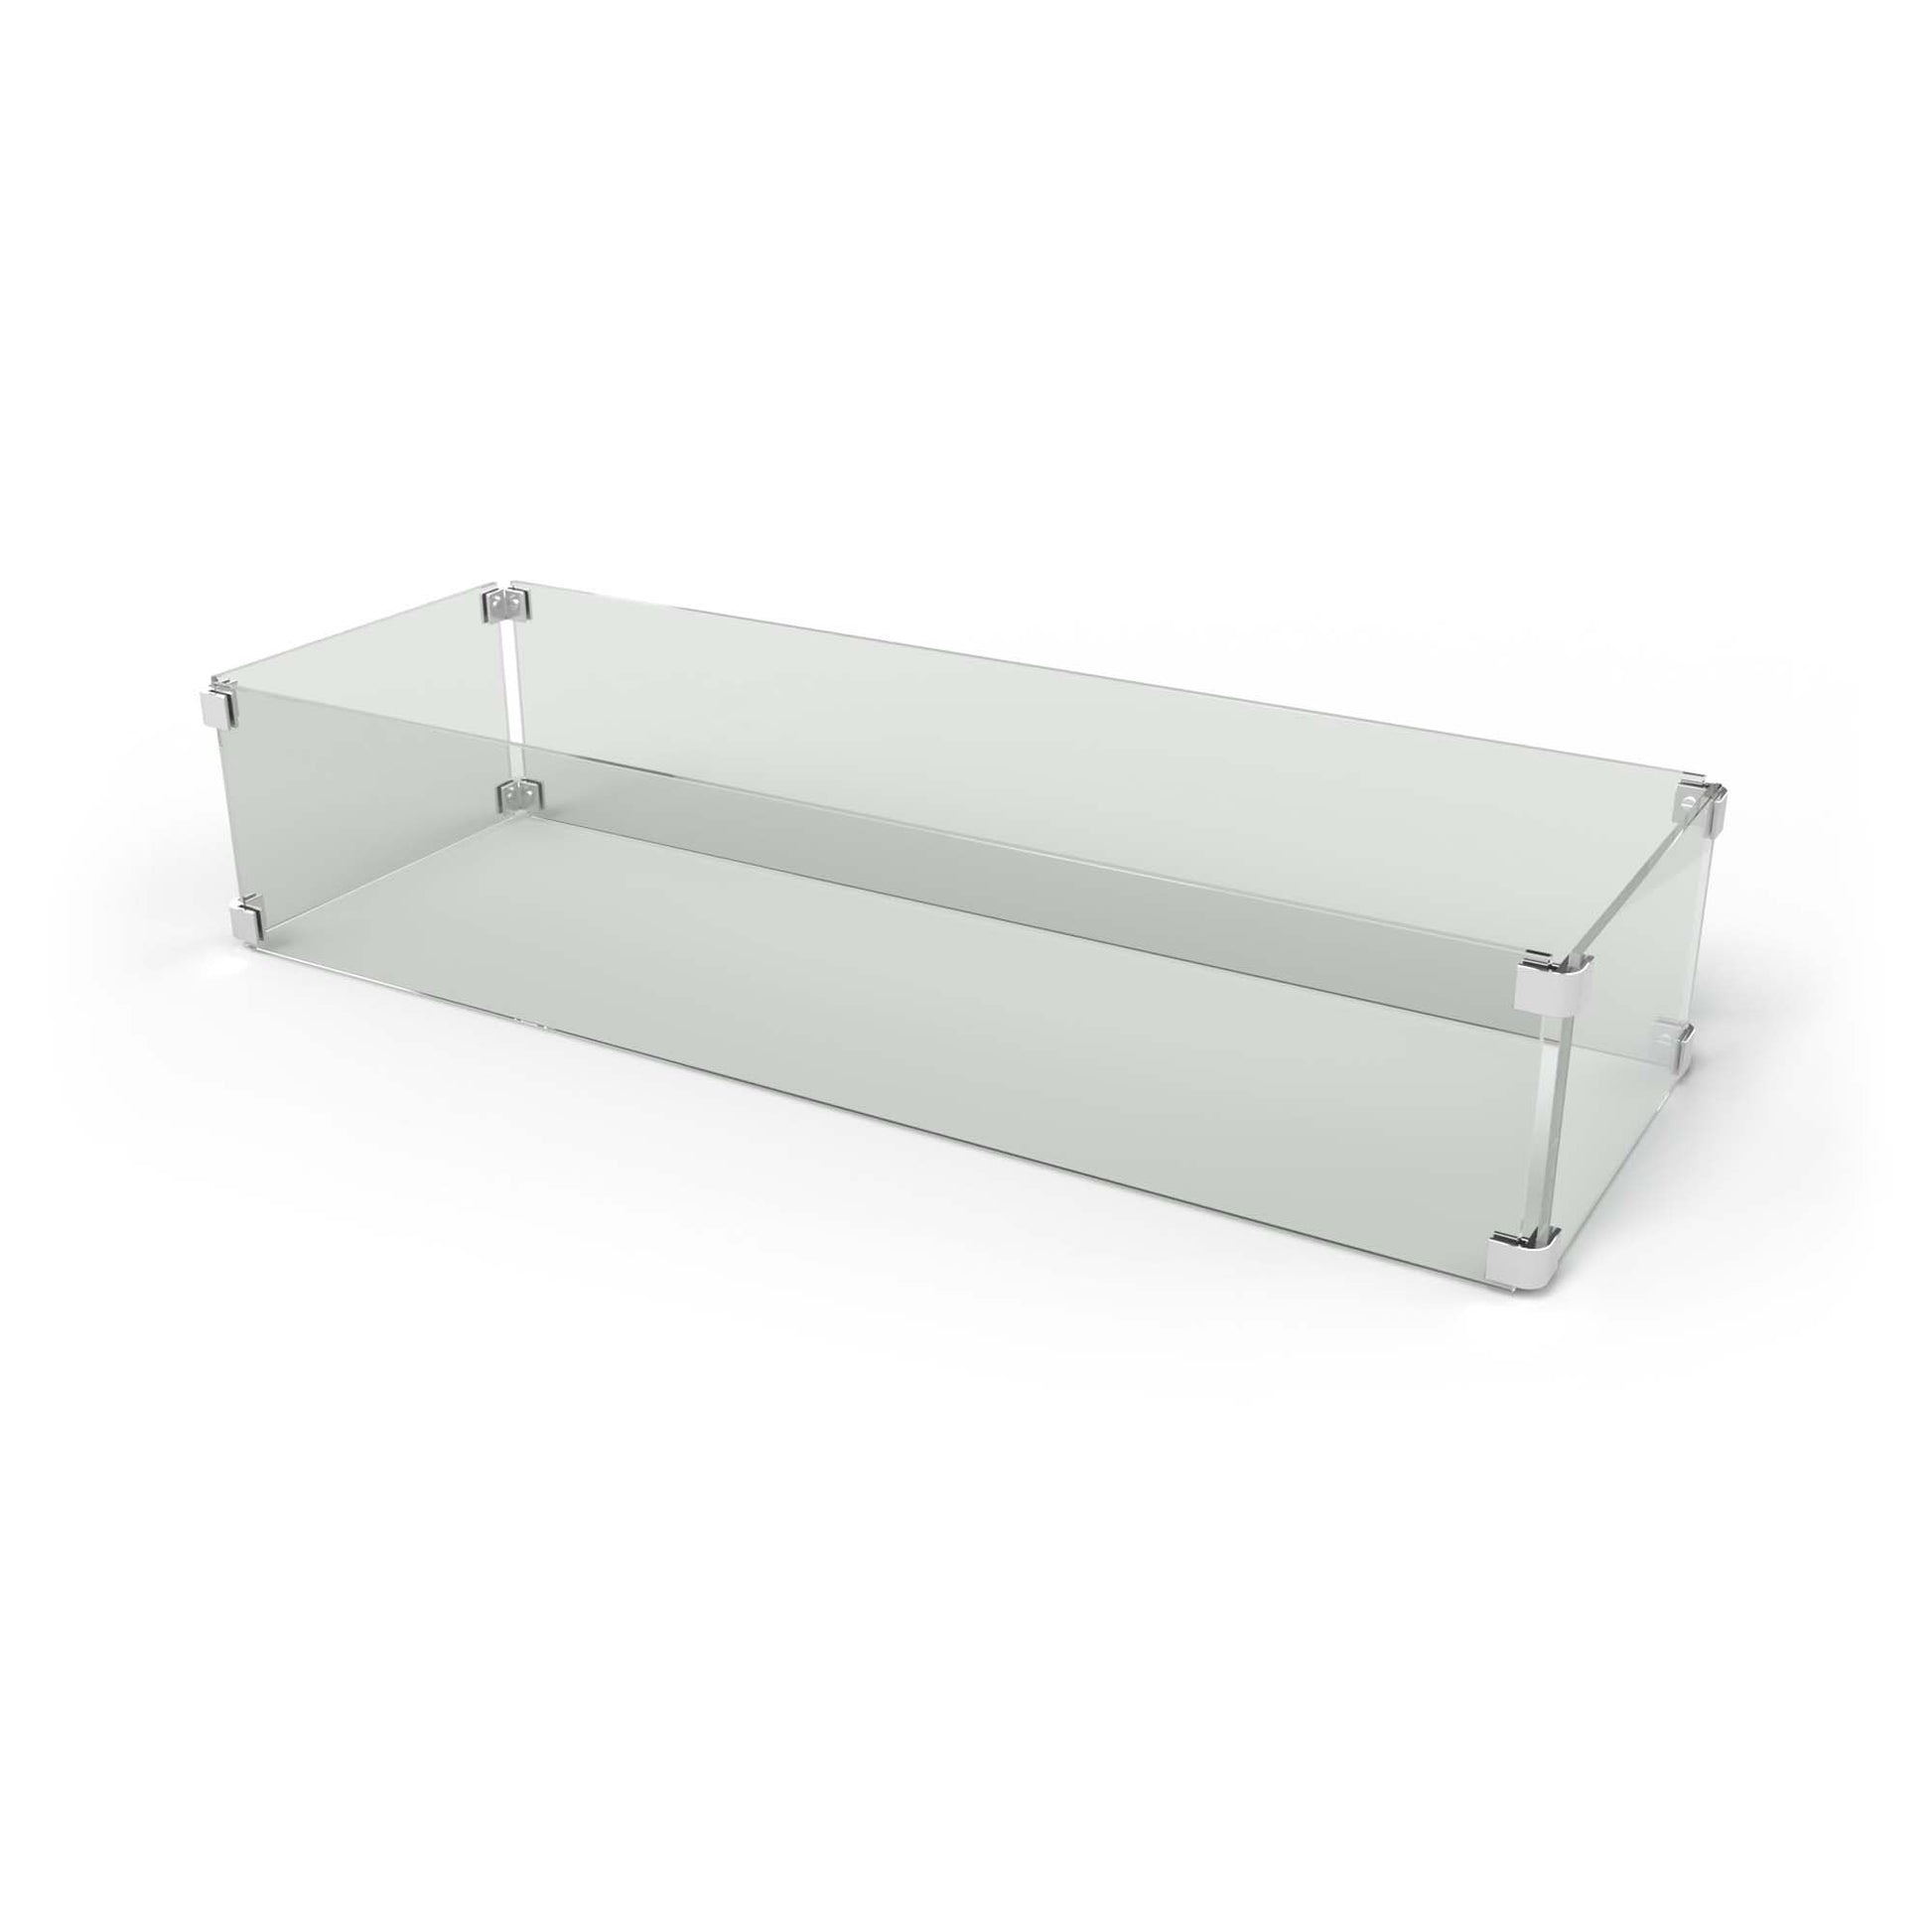 106" x 14" X 8" Rectangular Glass Wind Guard ¼" - Tempered Glass with Polished Edges-Novel Home